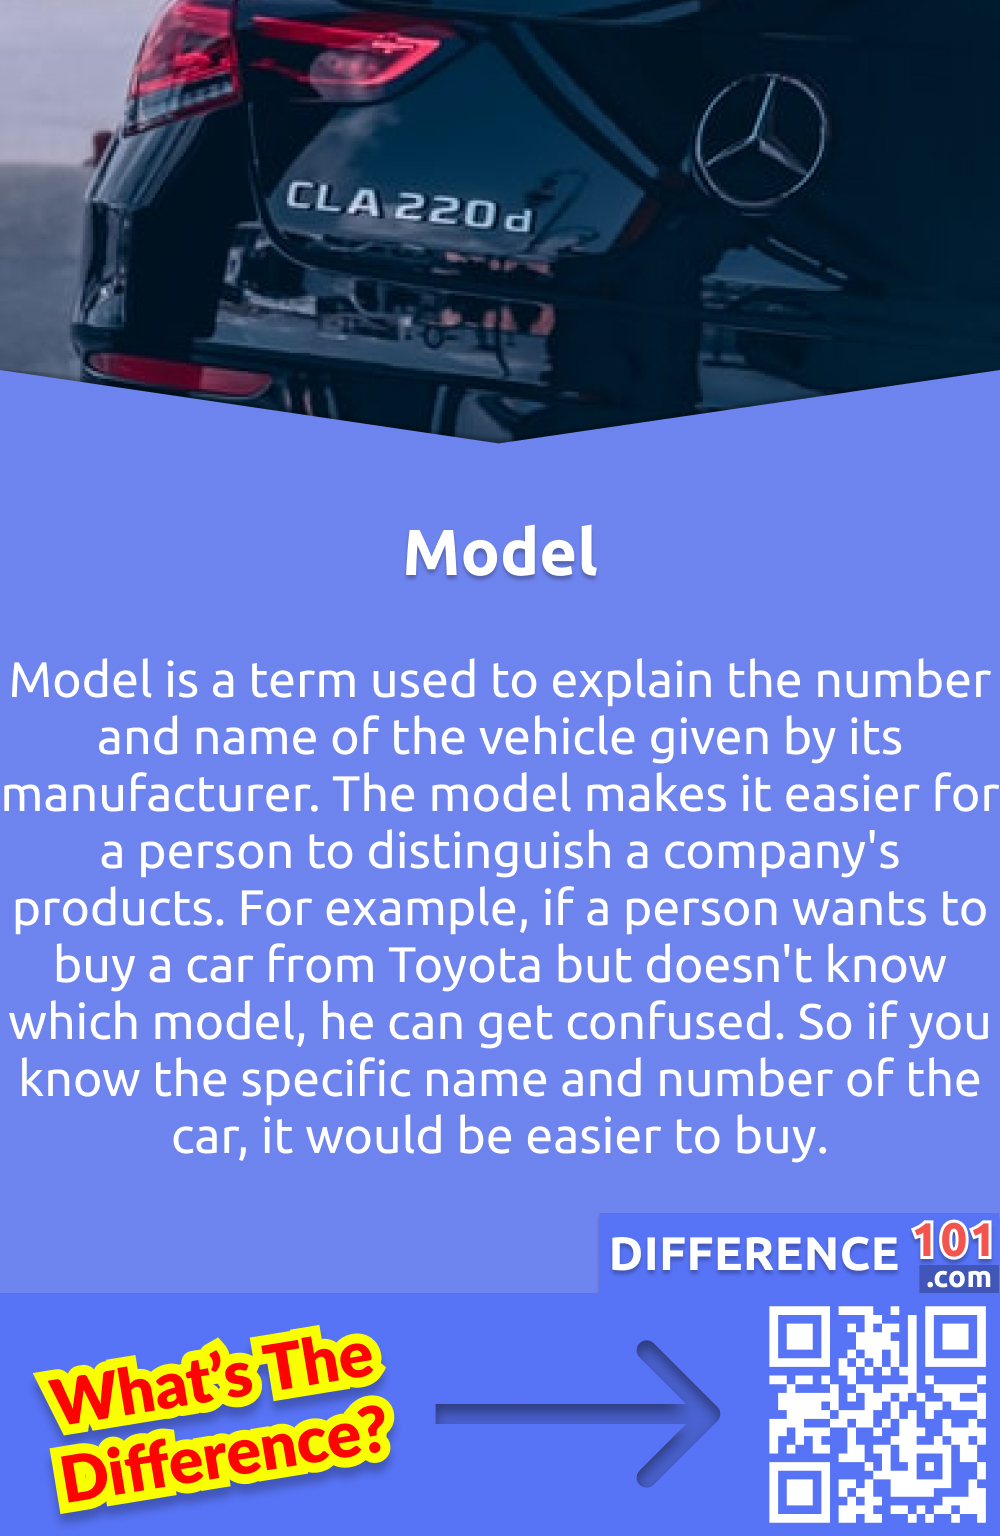 What is a model of a car? Model is a term used to explain the number and name of the vehicle given by its manufacturer. The model makes it easier for a person to distinguish a company's products. For example, if a person wants to buy a car from Toyota but doesn't know which model, he can get confused. So if you know the specific name and number of the car, it would be easier to buy.